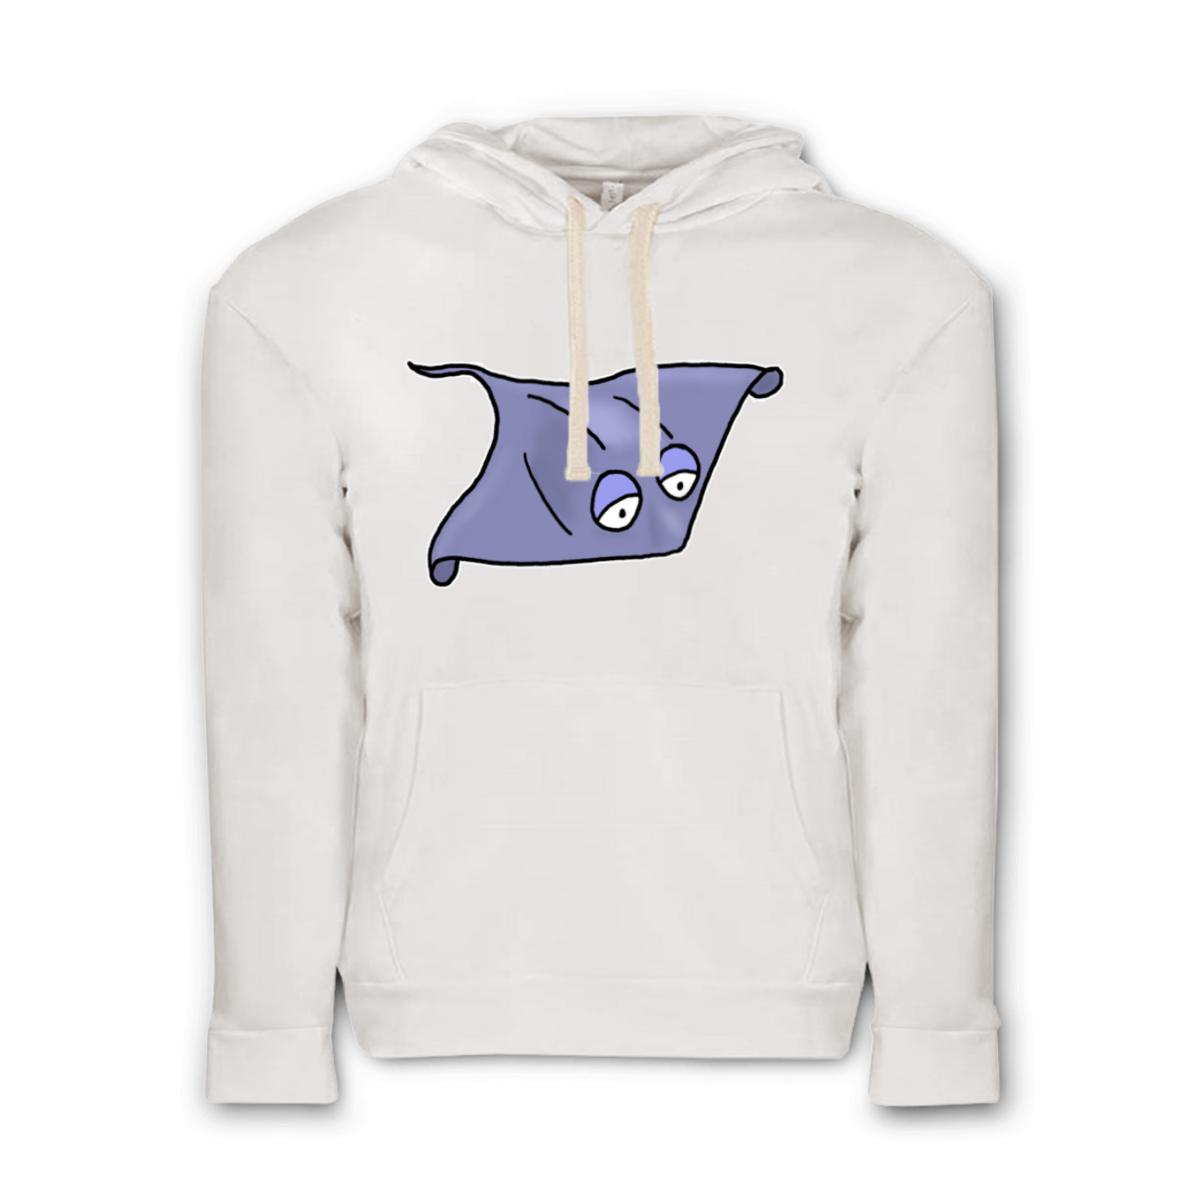 Stingray Unisex Pullover Hoodie Small white